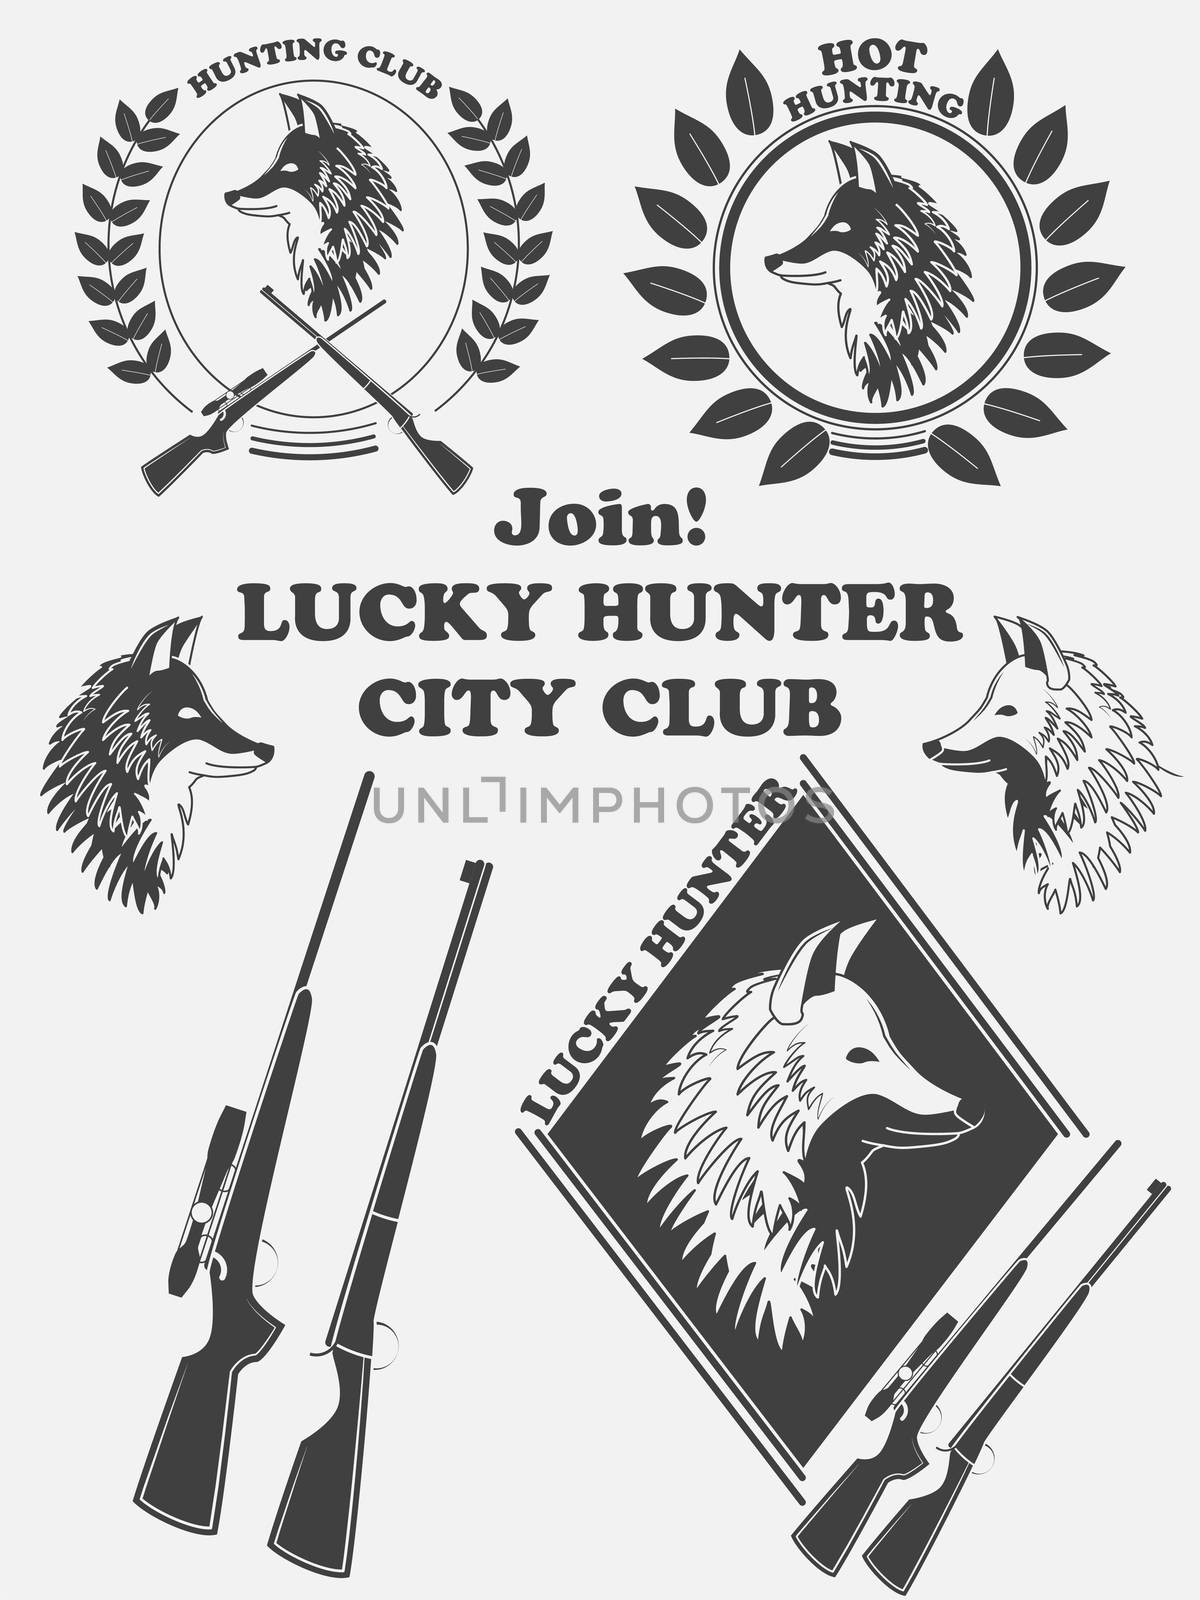 Vintage label with a fox, weapons for lucky hunting club. by Adamchuk